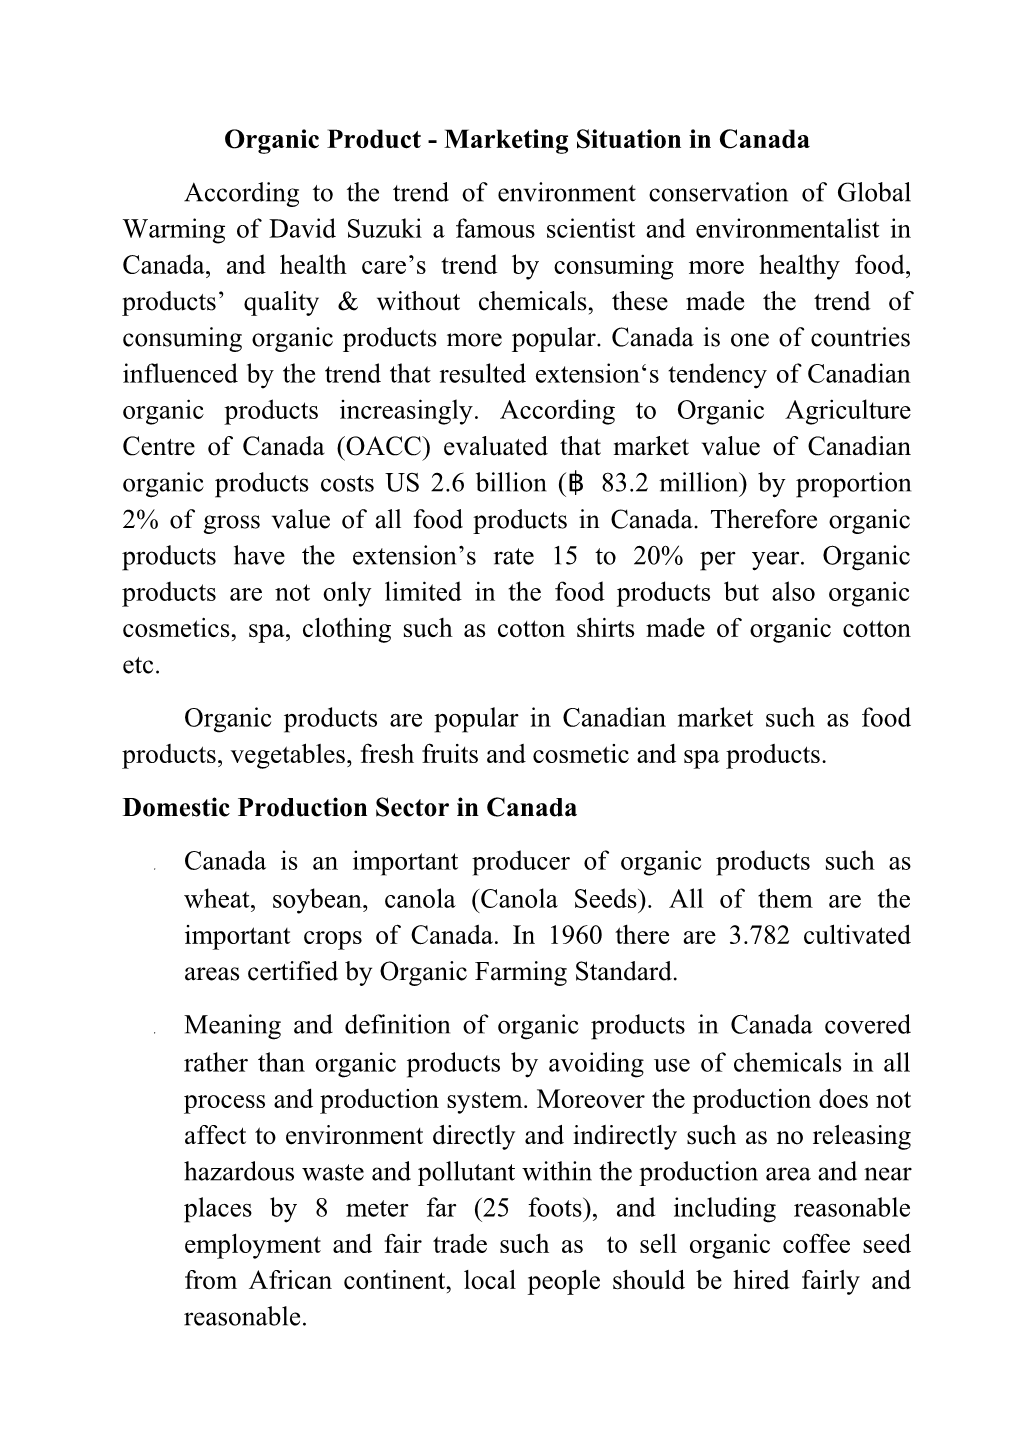 Organic Product - Marketing Situation in Canada